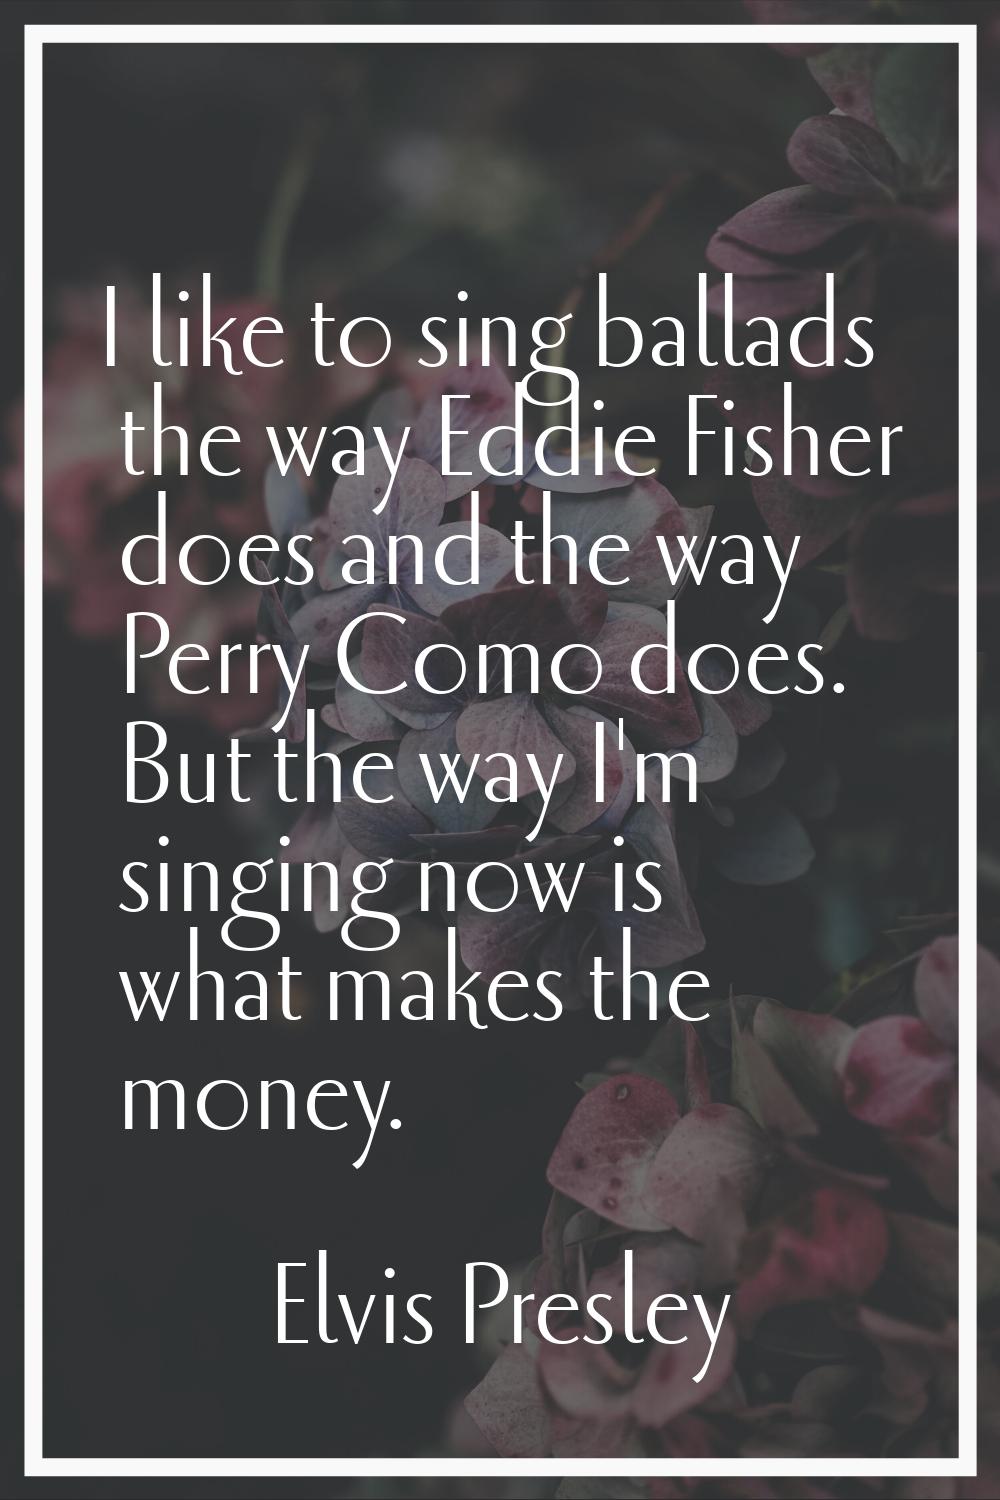 I like to sing ballads the way Eddie Fisher does and the way Perry Como does. But the way I'm singi